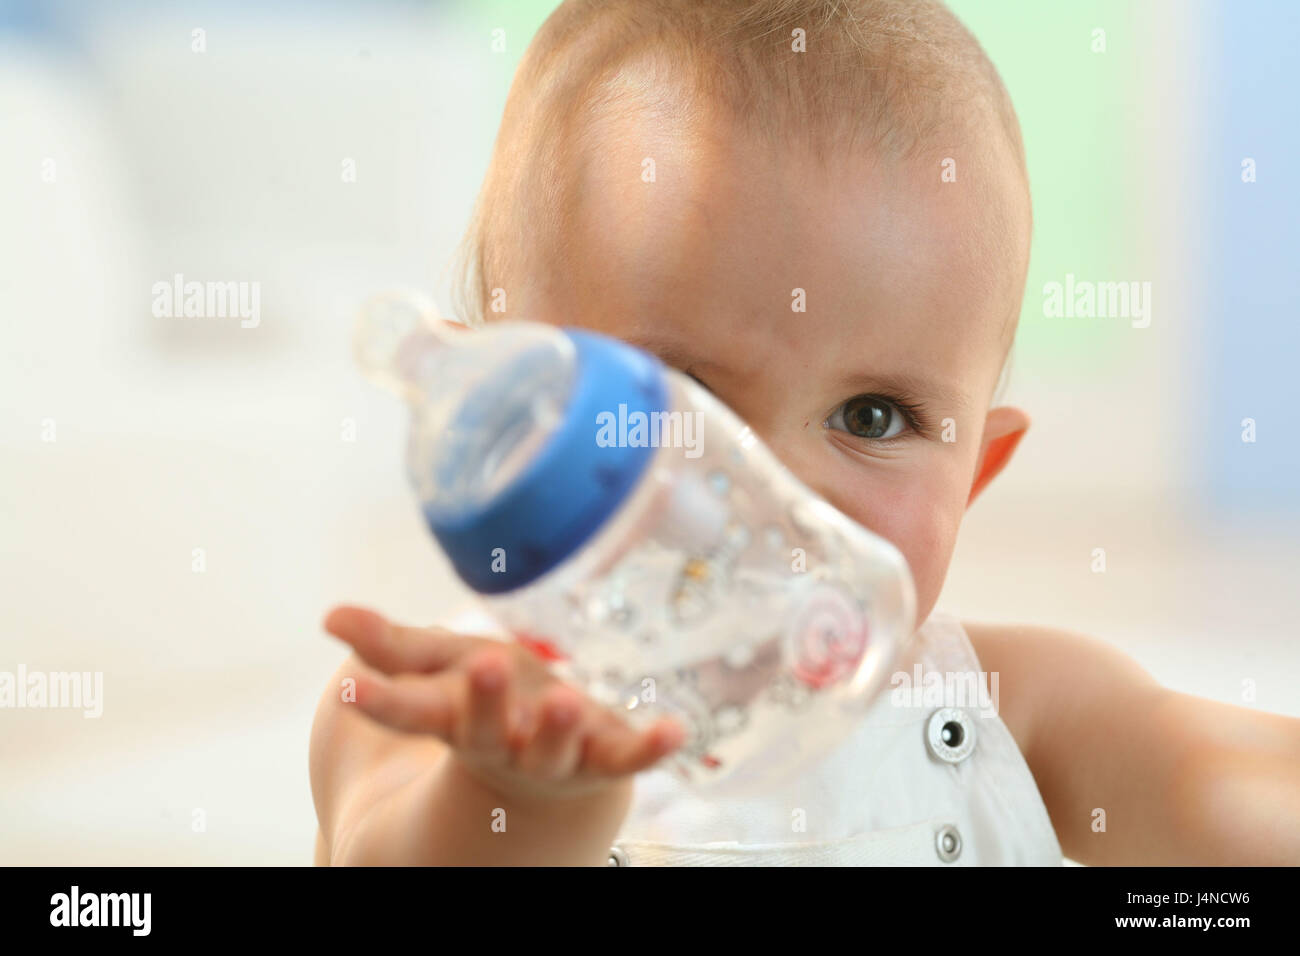 Baby, 8 months, bottles, hand, portrait, curled, Stock Photo